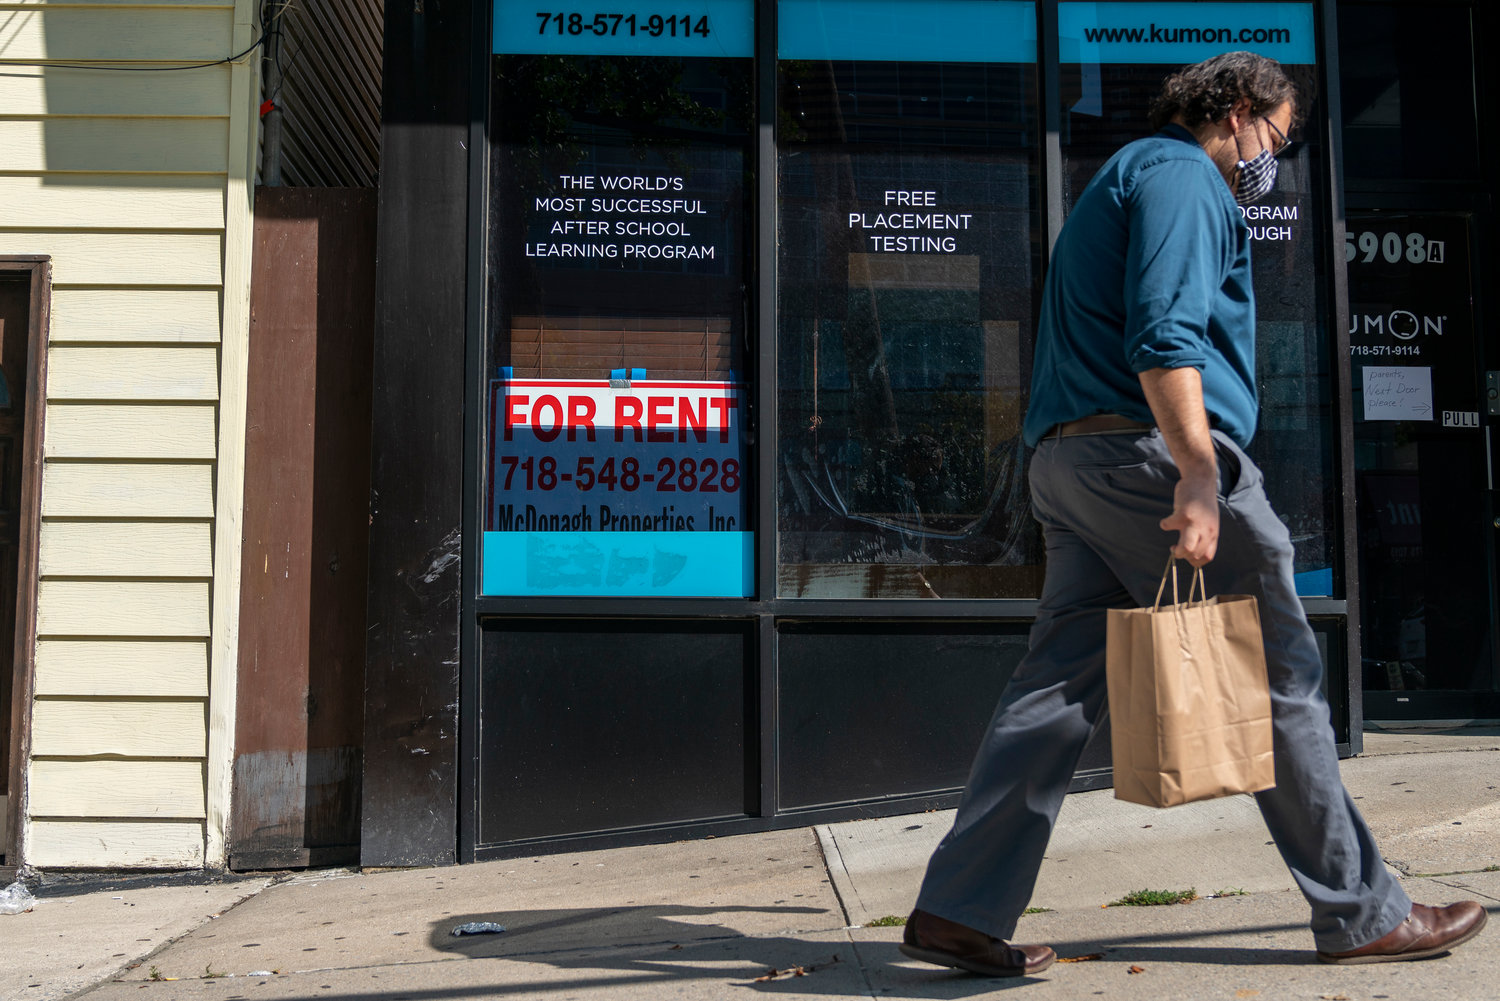 A man walks past the ‘for rent’ sign on the old Kumon center’s window on Riverdale Avenue. The sign might be misleading, however, as this Kumon franchise didn’t go out of business — It just moved next door.